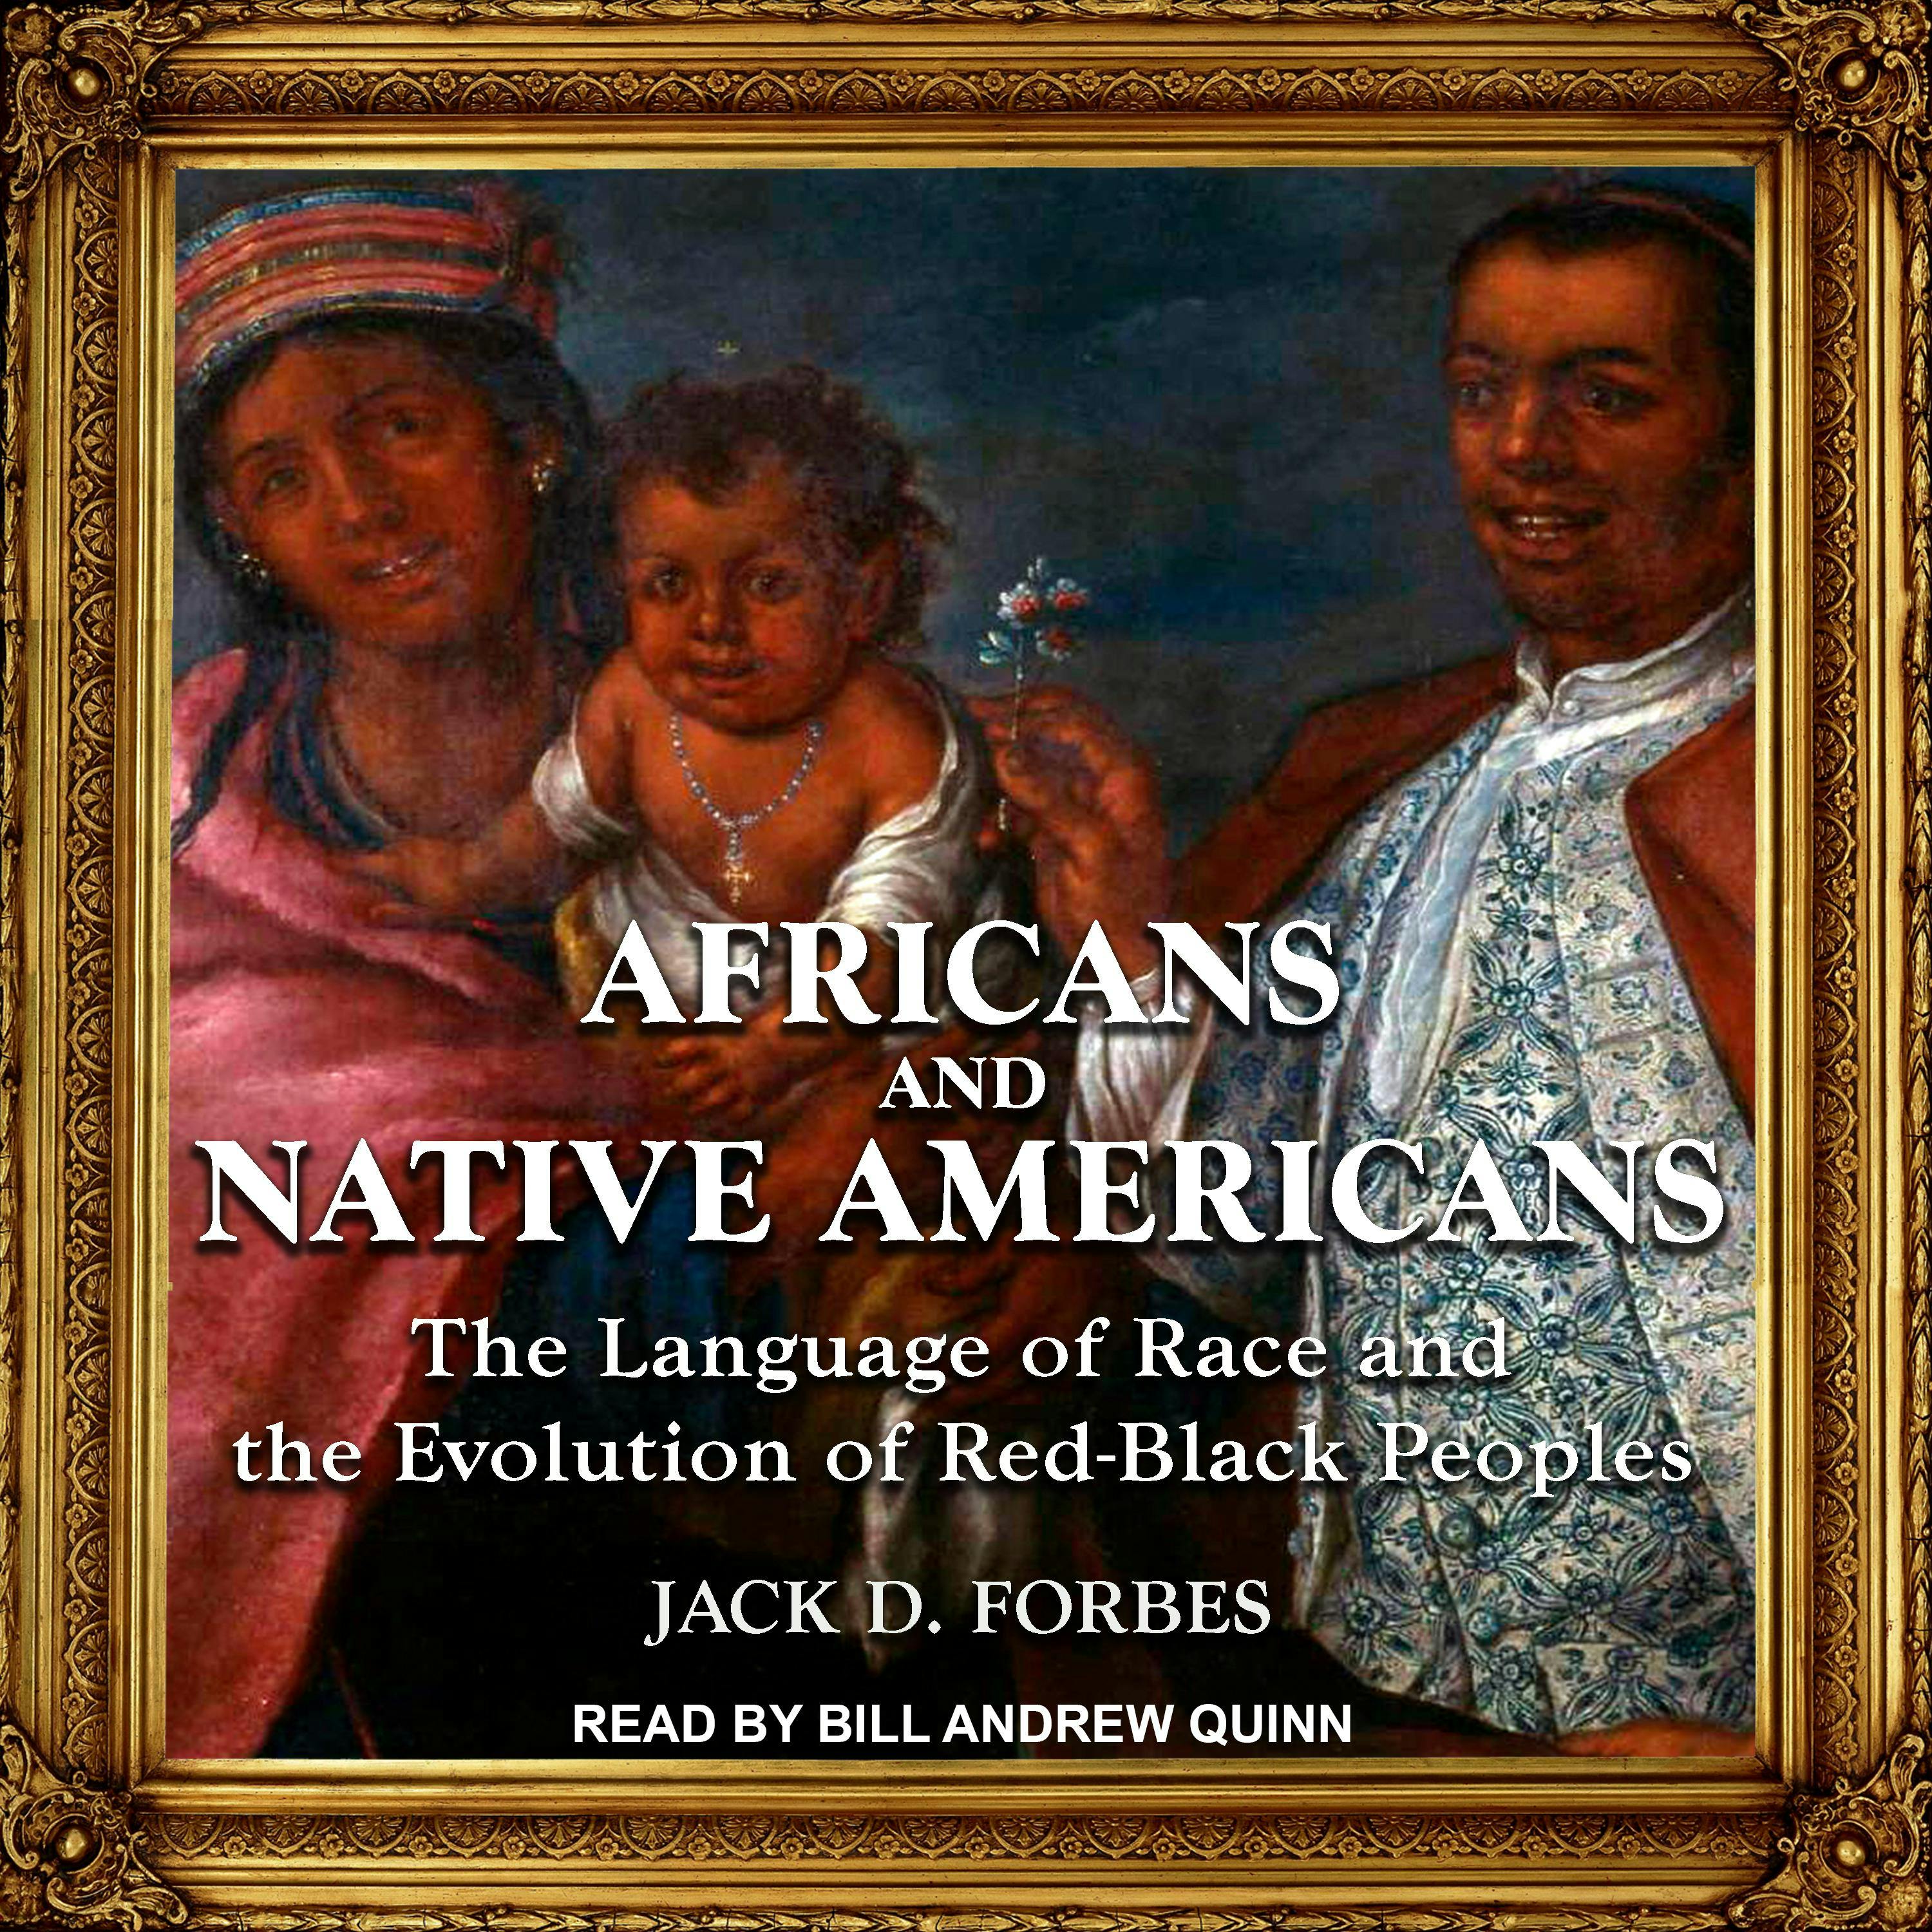 Africans and Native Americans: The Language of Race and the Evolution of Red-Black Peoples - Jack D. Forbes